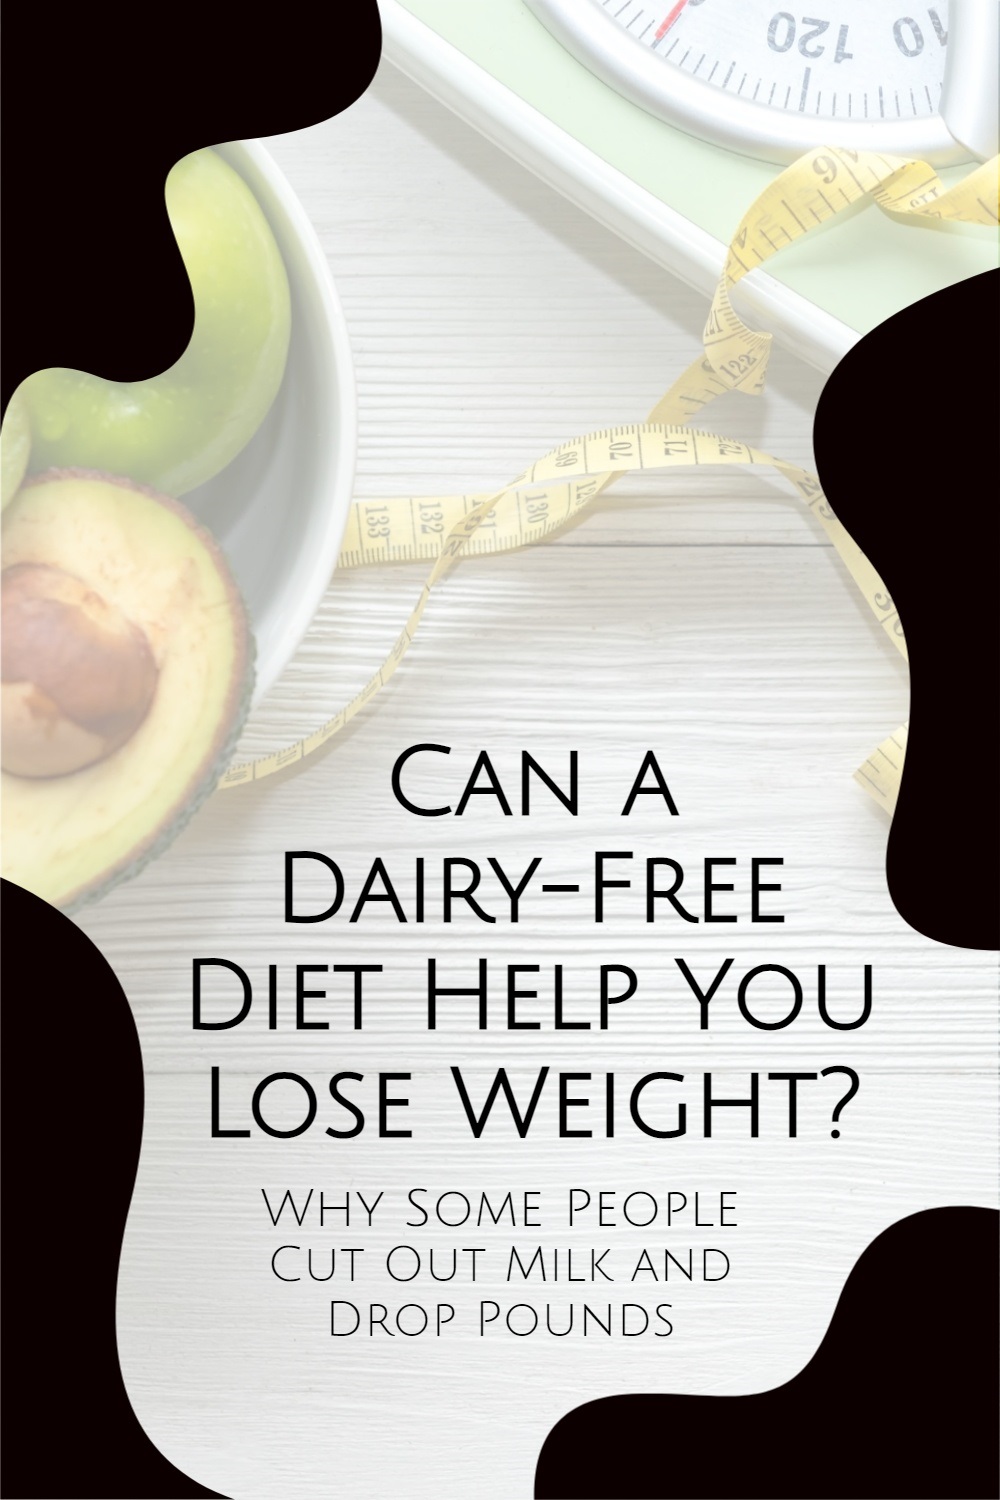 Why a Dairy-Free Diet Helps Some People with Weight Loss and Tips to Healthfully Lose Weight without Milk